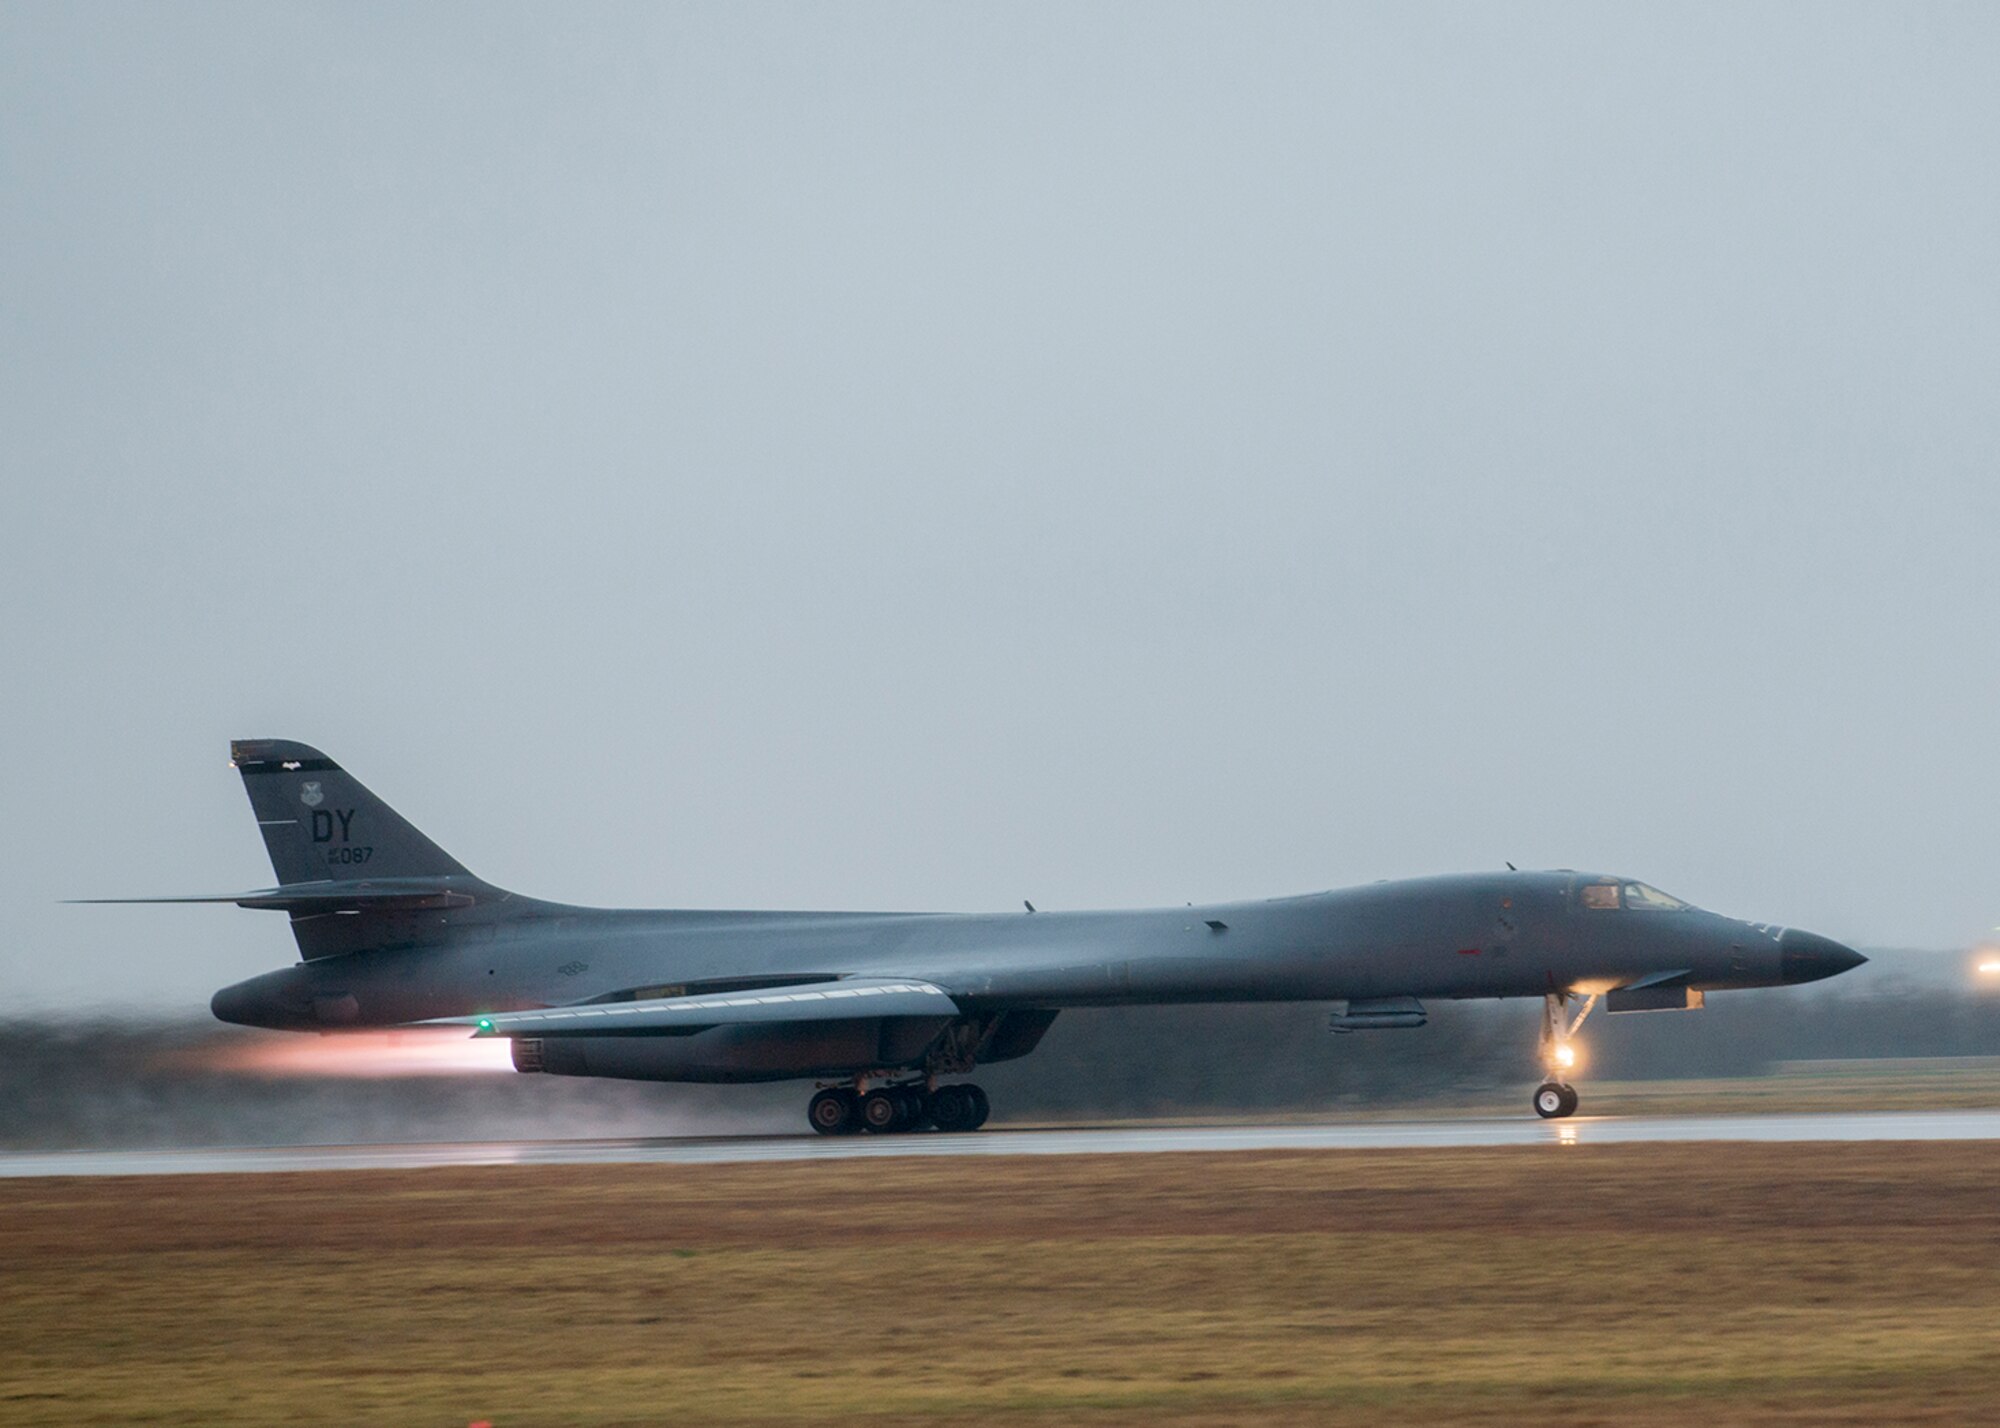 A 9th Bomb Squadron B-1B Lancer at Dyess Air Force Base, Texas, begins its 15-hour flight to the Alaskan Yukon Range Feb. 23, 2016, during a B-1 Combat Mission Effectiveness Exercise. This was the first exercise to utilize Block 16 B-1 aircraft in a long-range mission. Dyess operations, maintenance and support personnel were successfully able to deploy all six aircraft tasked for the exercise within 48 hours. (U.S. Air Force photo by Airman 1st Class Austin Mayfield/Released)
